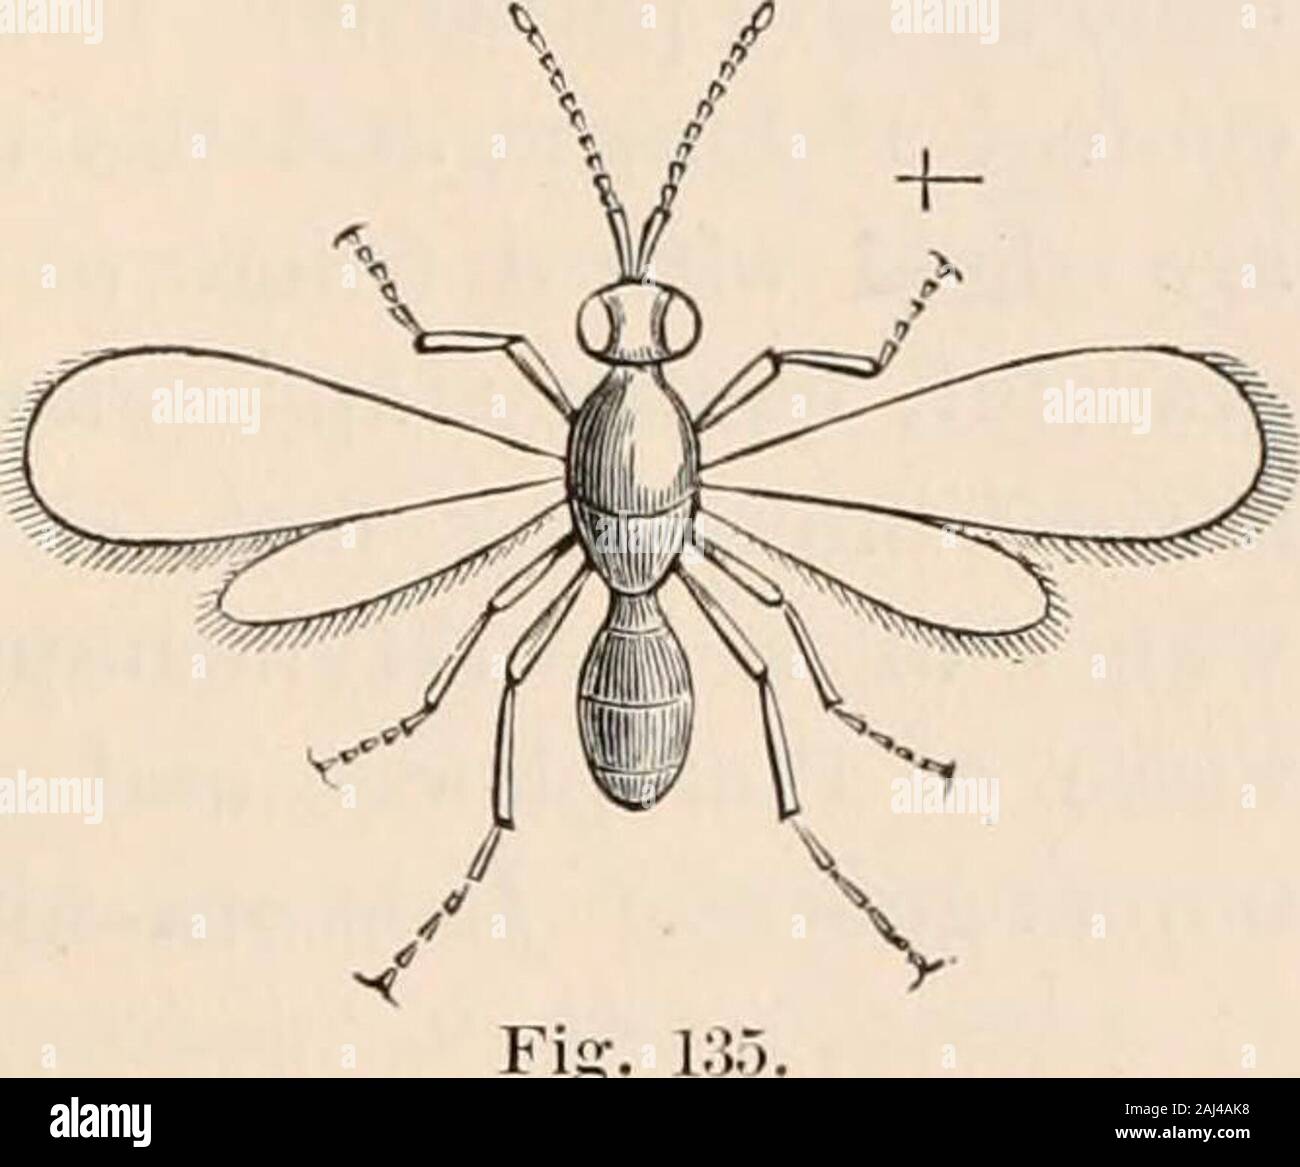 Guide to the study of insects, and a treatise on those injurious and beneficial to crops: for the use of colleges, farm-schools, and agriculturists . thorax andhead. Dr. Fitch states that /. inserens is supposed by Kirby toinsert its eggs into those of the Wheat-midge. In the genusGalesus of Curtis, the mandibles are so enlarged and length-ened as to form a long beak, and Westwood farther states thatin some specimens the anterior wings have a notch at the ex-tremity. Says genus Coptera has similar wings. C. politaSay was discovered in Indiana. In the very minute species of Mymar and its allies Stock Photo